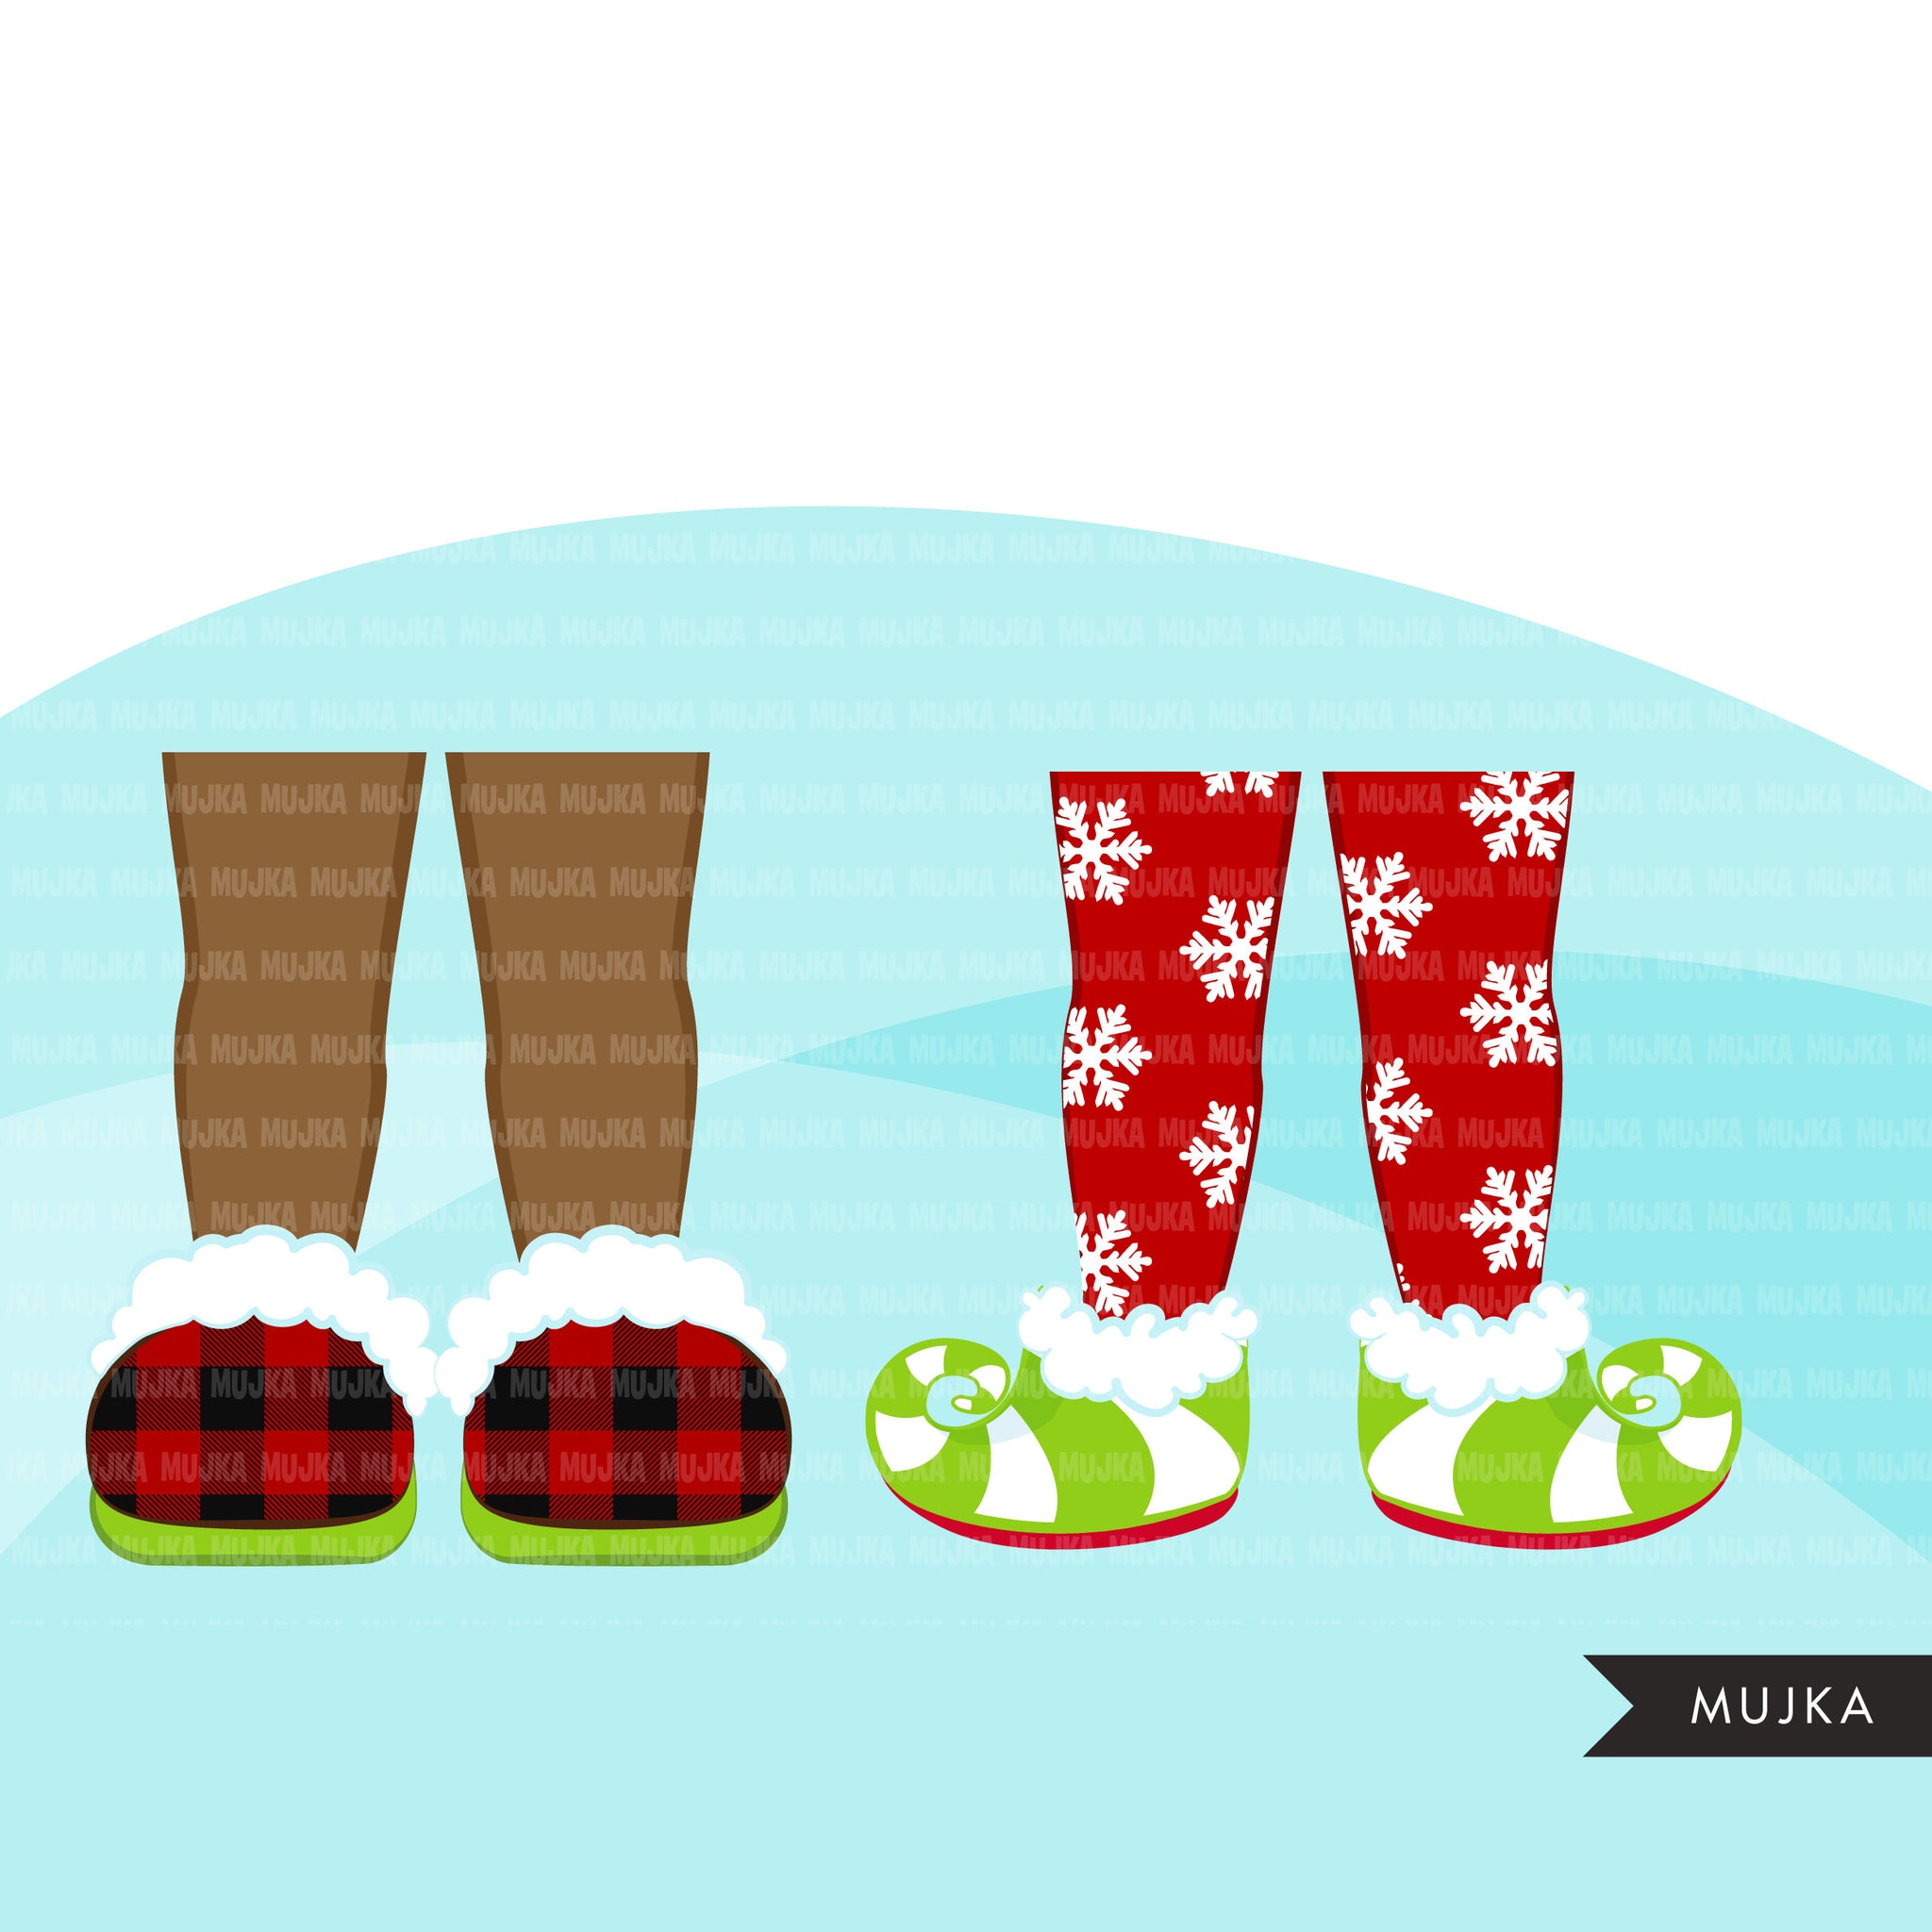 Christmas slippers clipart, Christmas graphics, woolly socks, elf slippers, Noel graphics, Christmas legs, png sublimation clip art